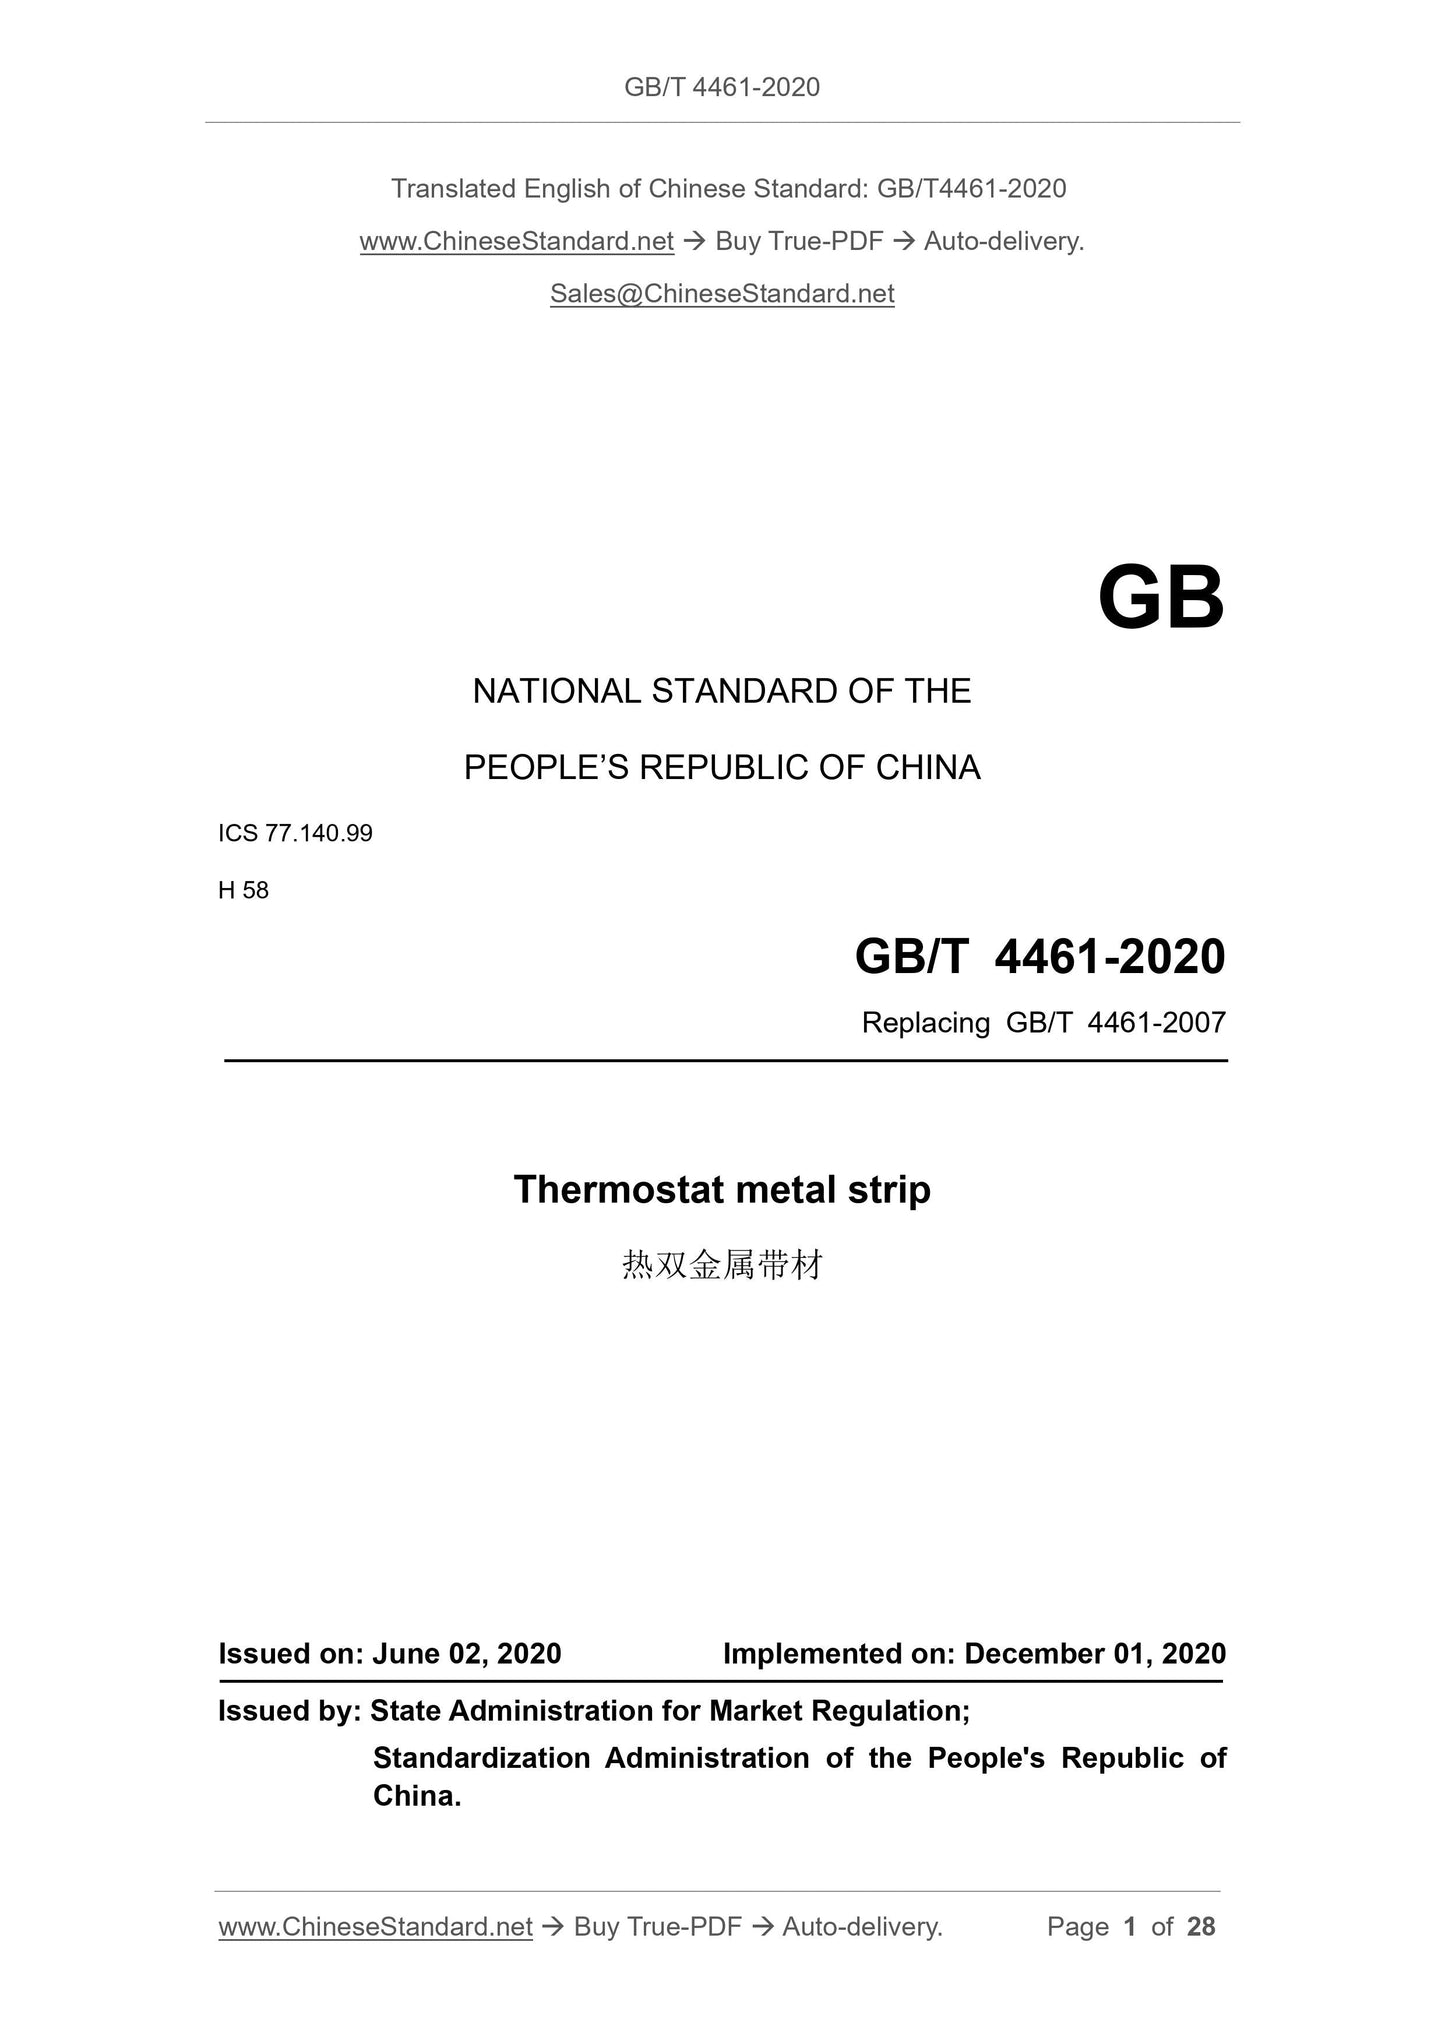 GB/T 4461-2020 Page 1